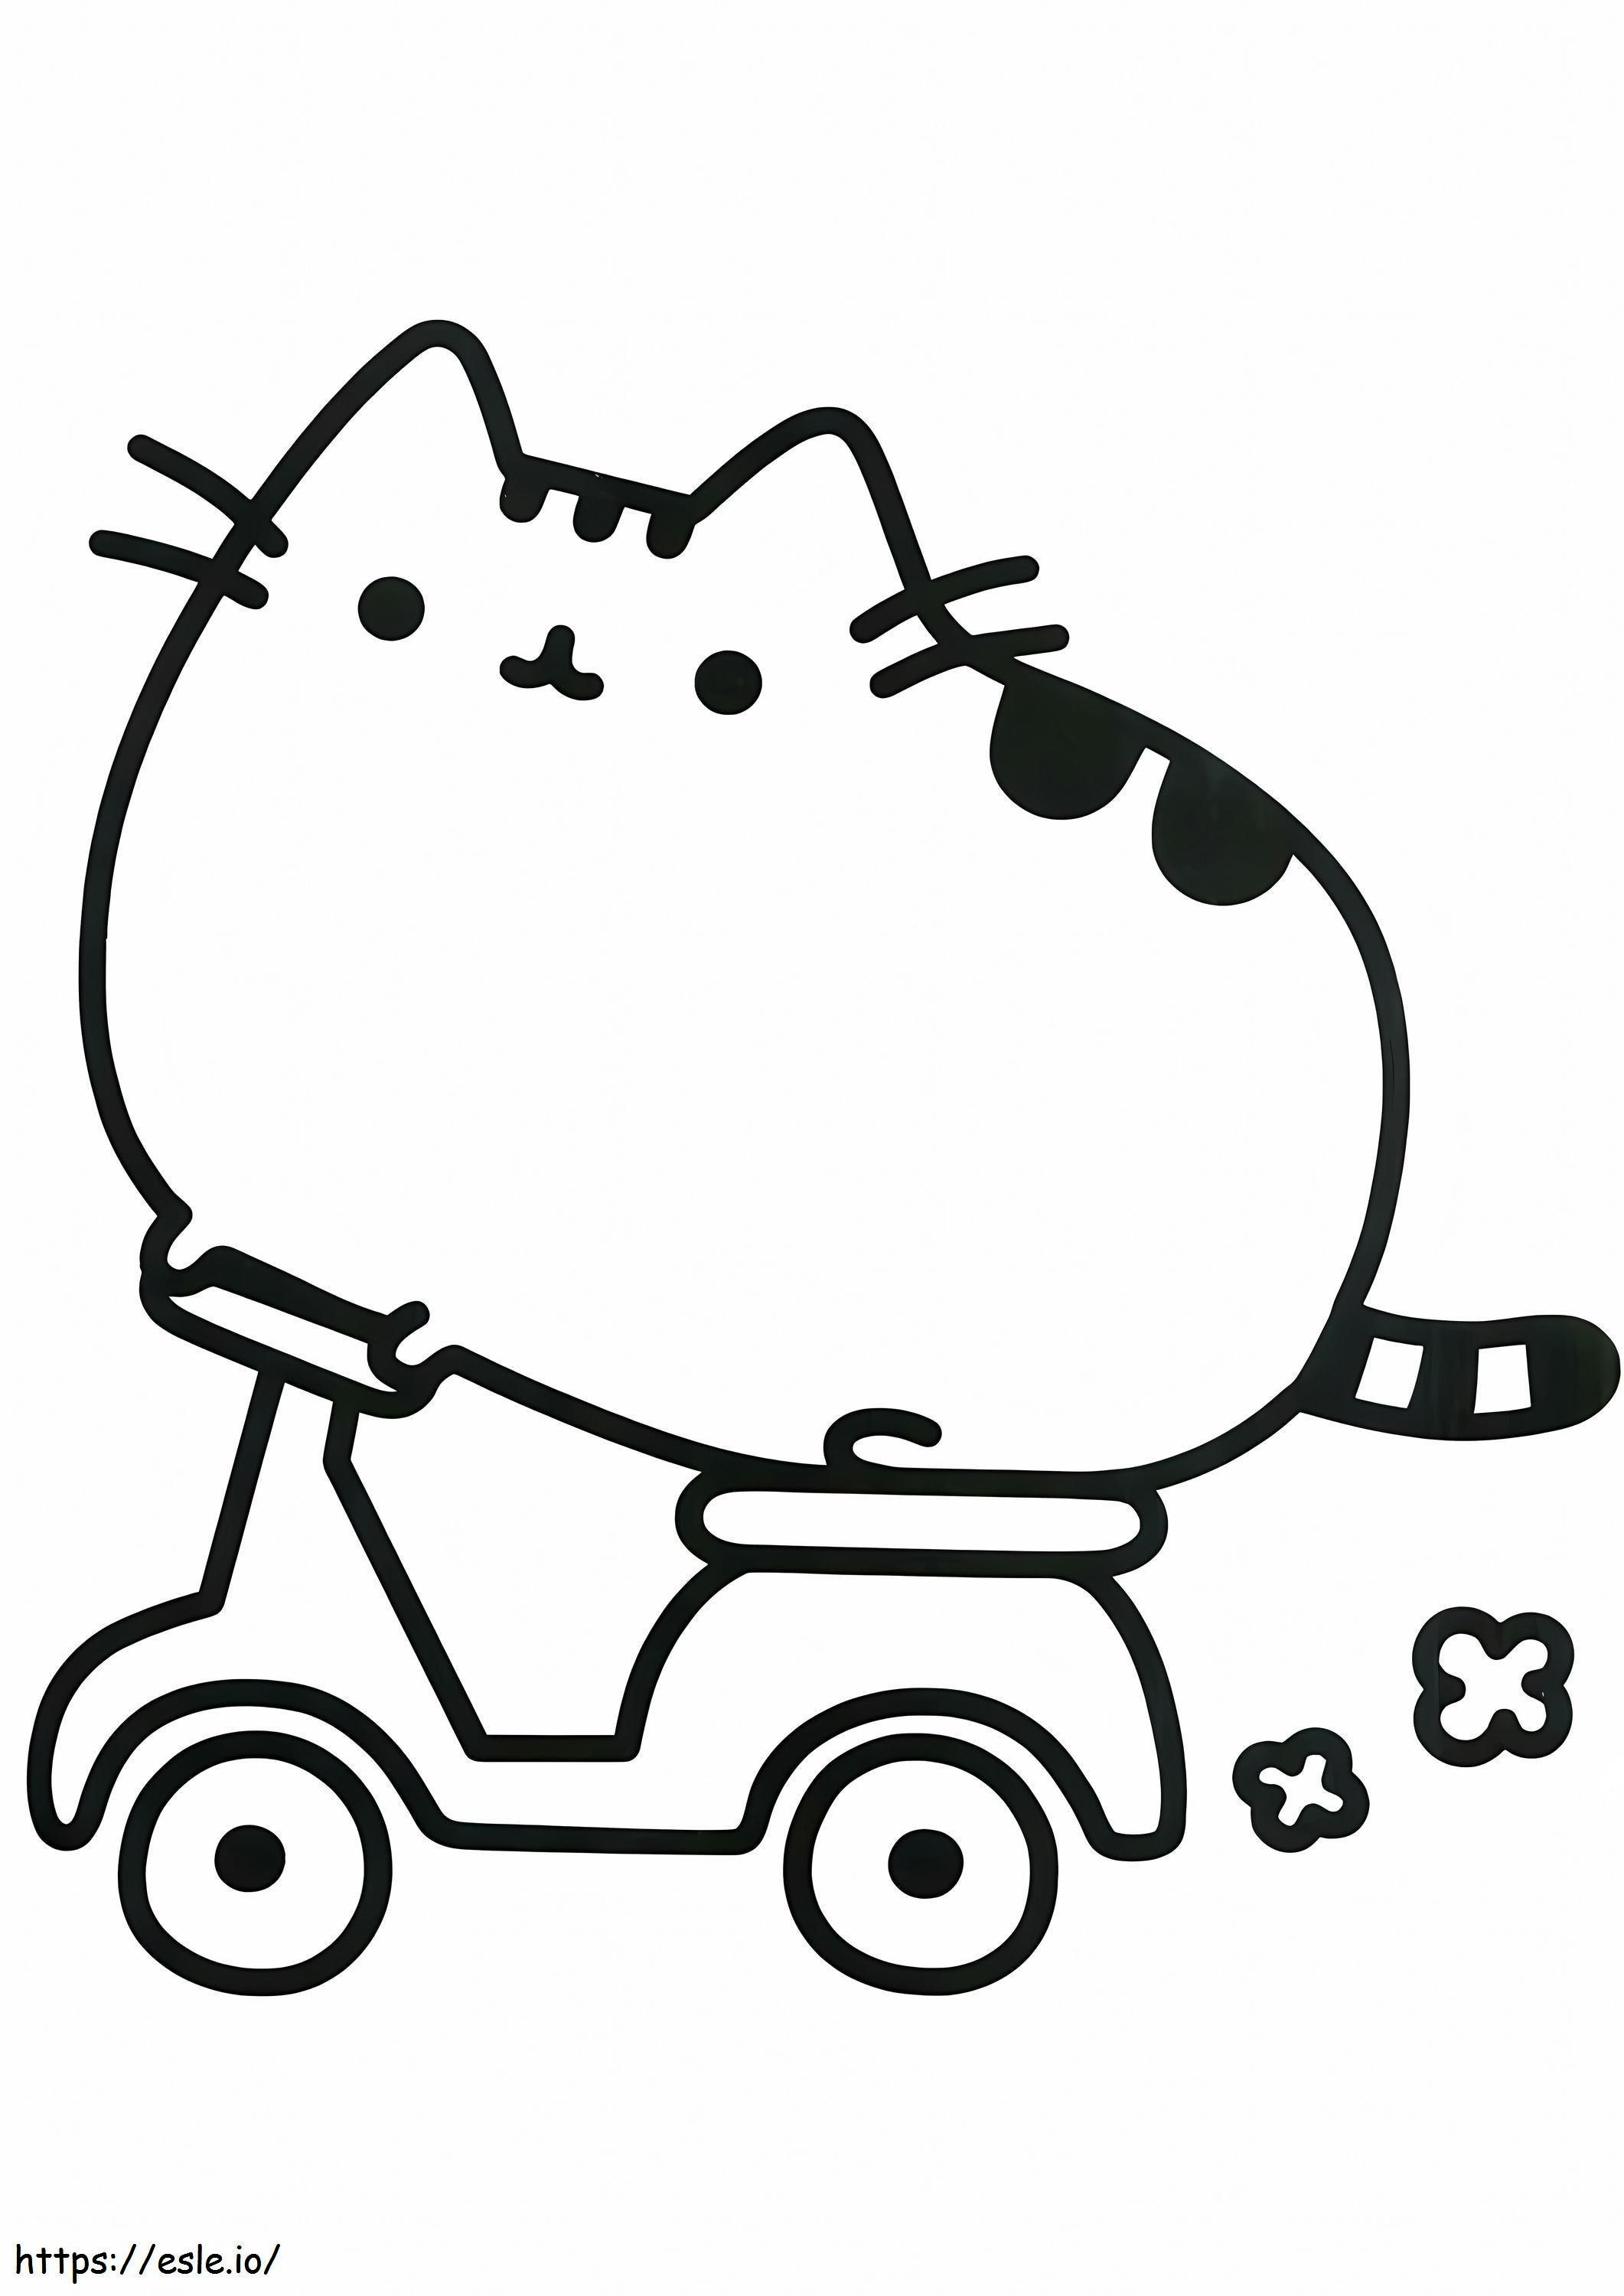 Pusheen Rides A Motorcycle coloring page